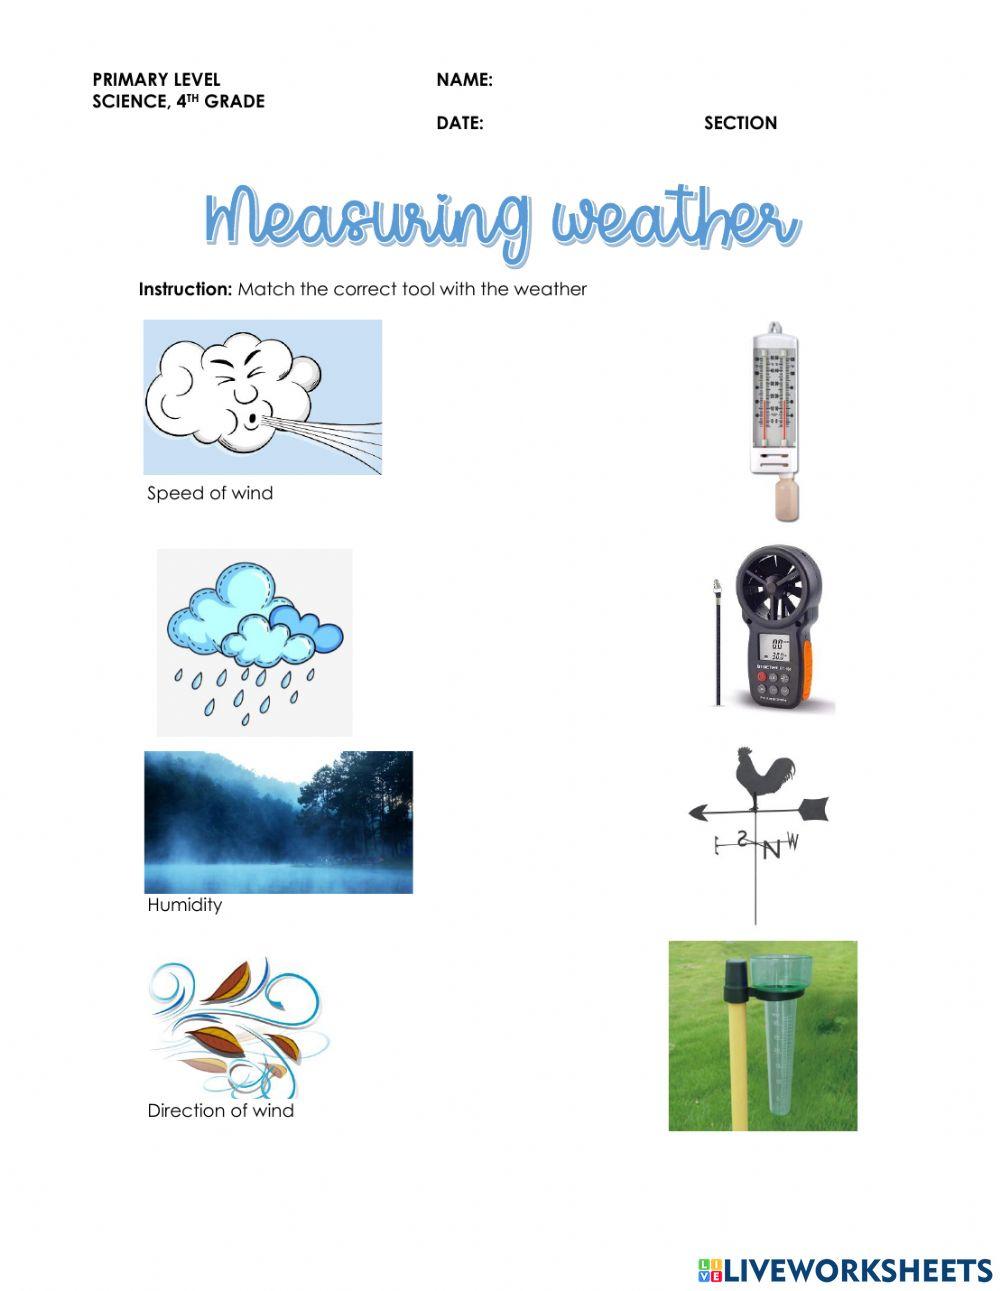 Measuring weather tools